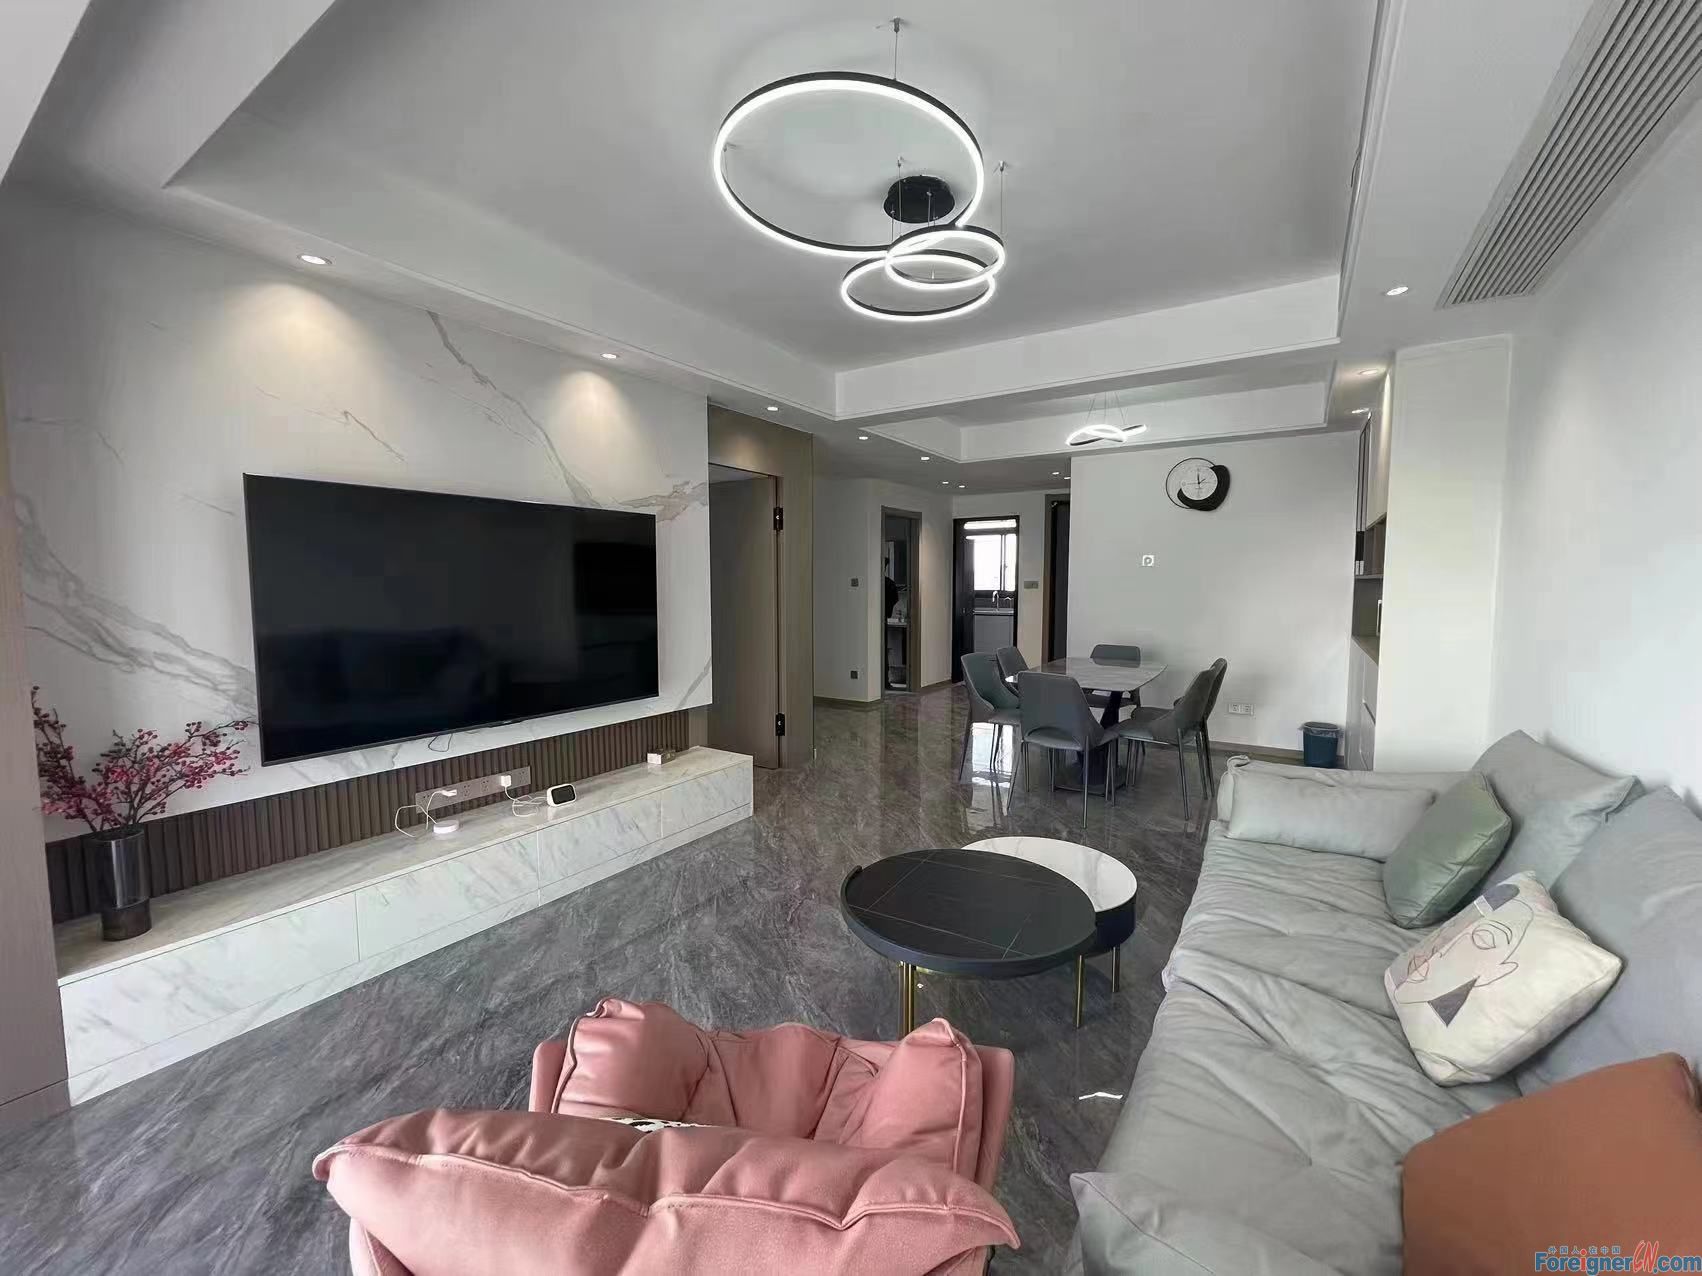 Stunning!!! Duplex Apartment to Rent in Suzhou/ 4 rooms and 3 baths/Spacious,Brand new /Floor heating，Central AC ,bathtub/close to Subway Station ,Shopping mall